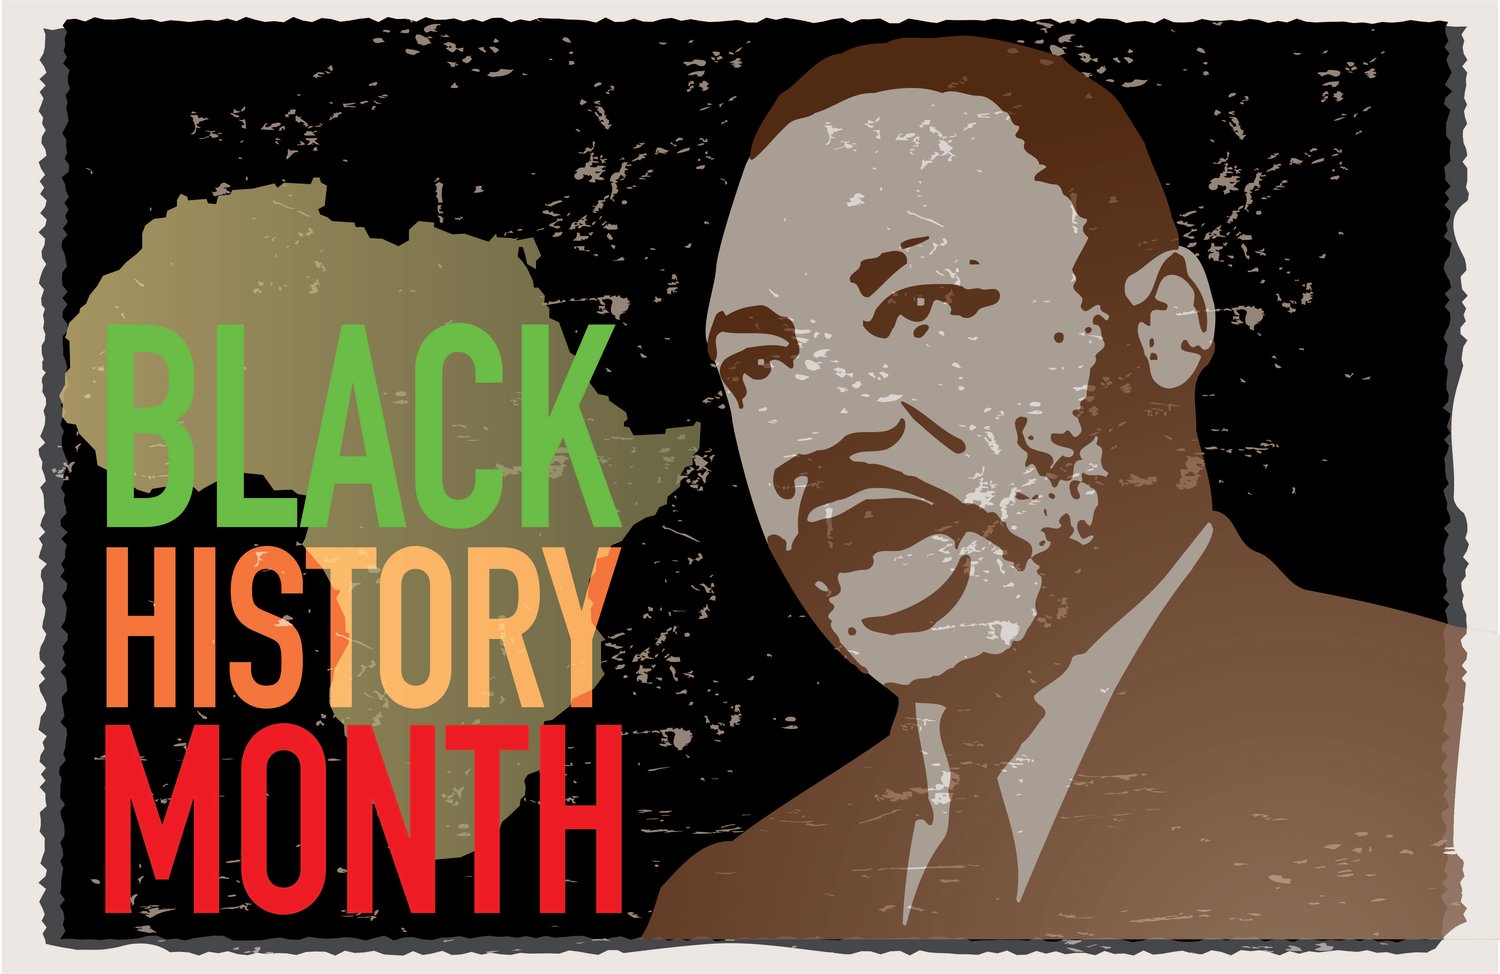 From 1-2:30 p.m. Saturday, Feb. 4, the Utica/Oneida County Branch of the NAACP will mark Black History Month with its annual program hosted by the Oneida County History Center (OCHC).